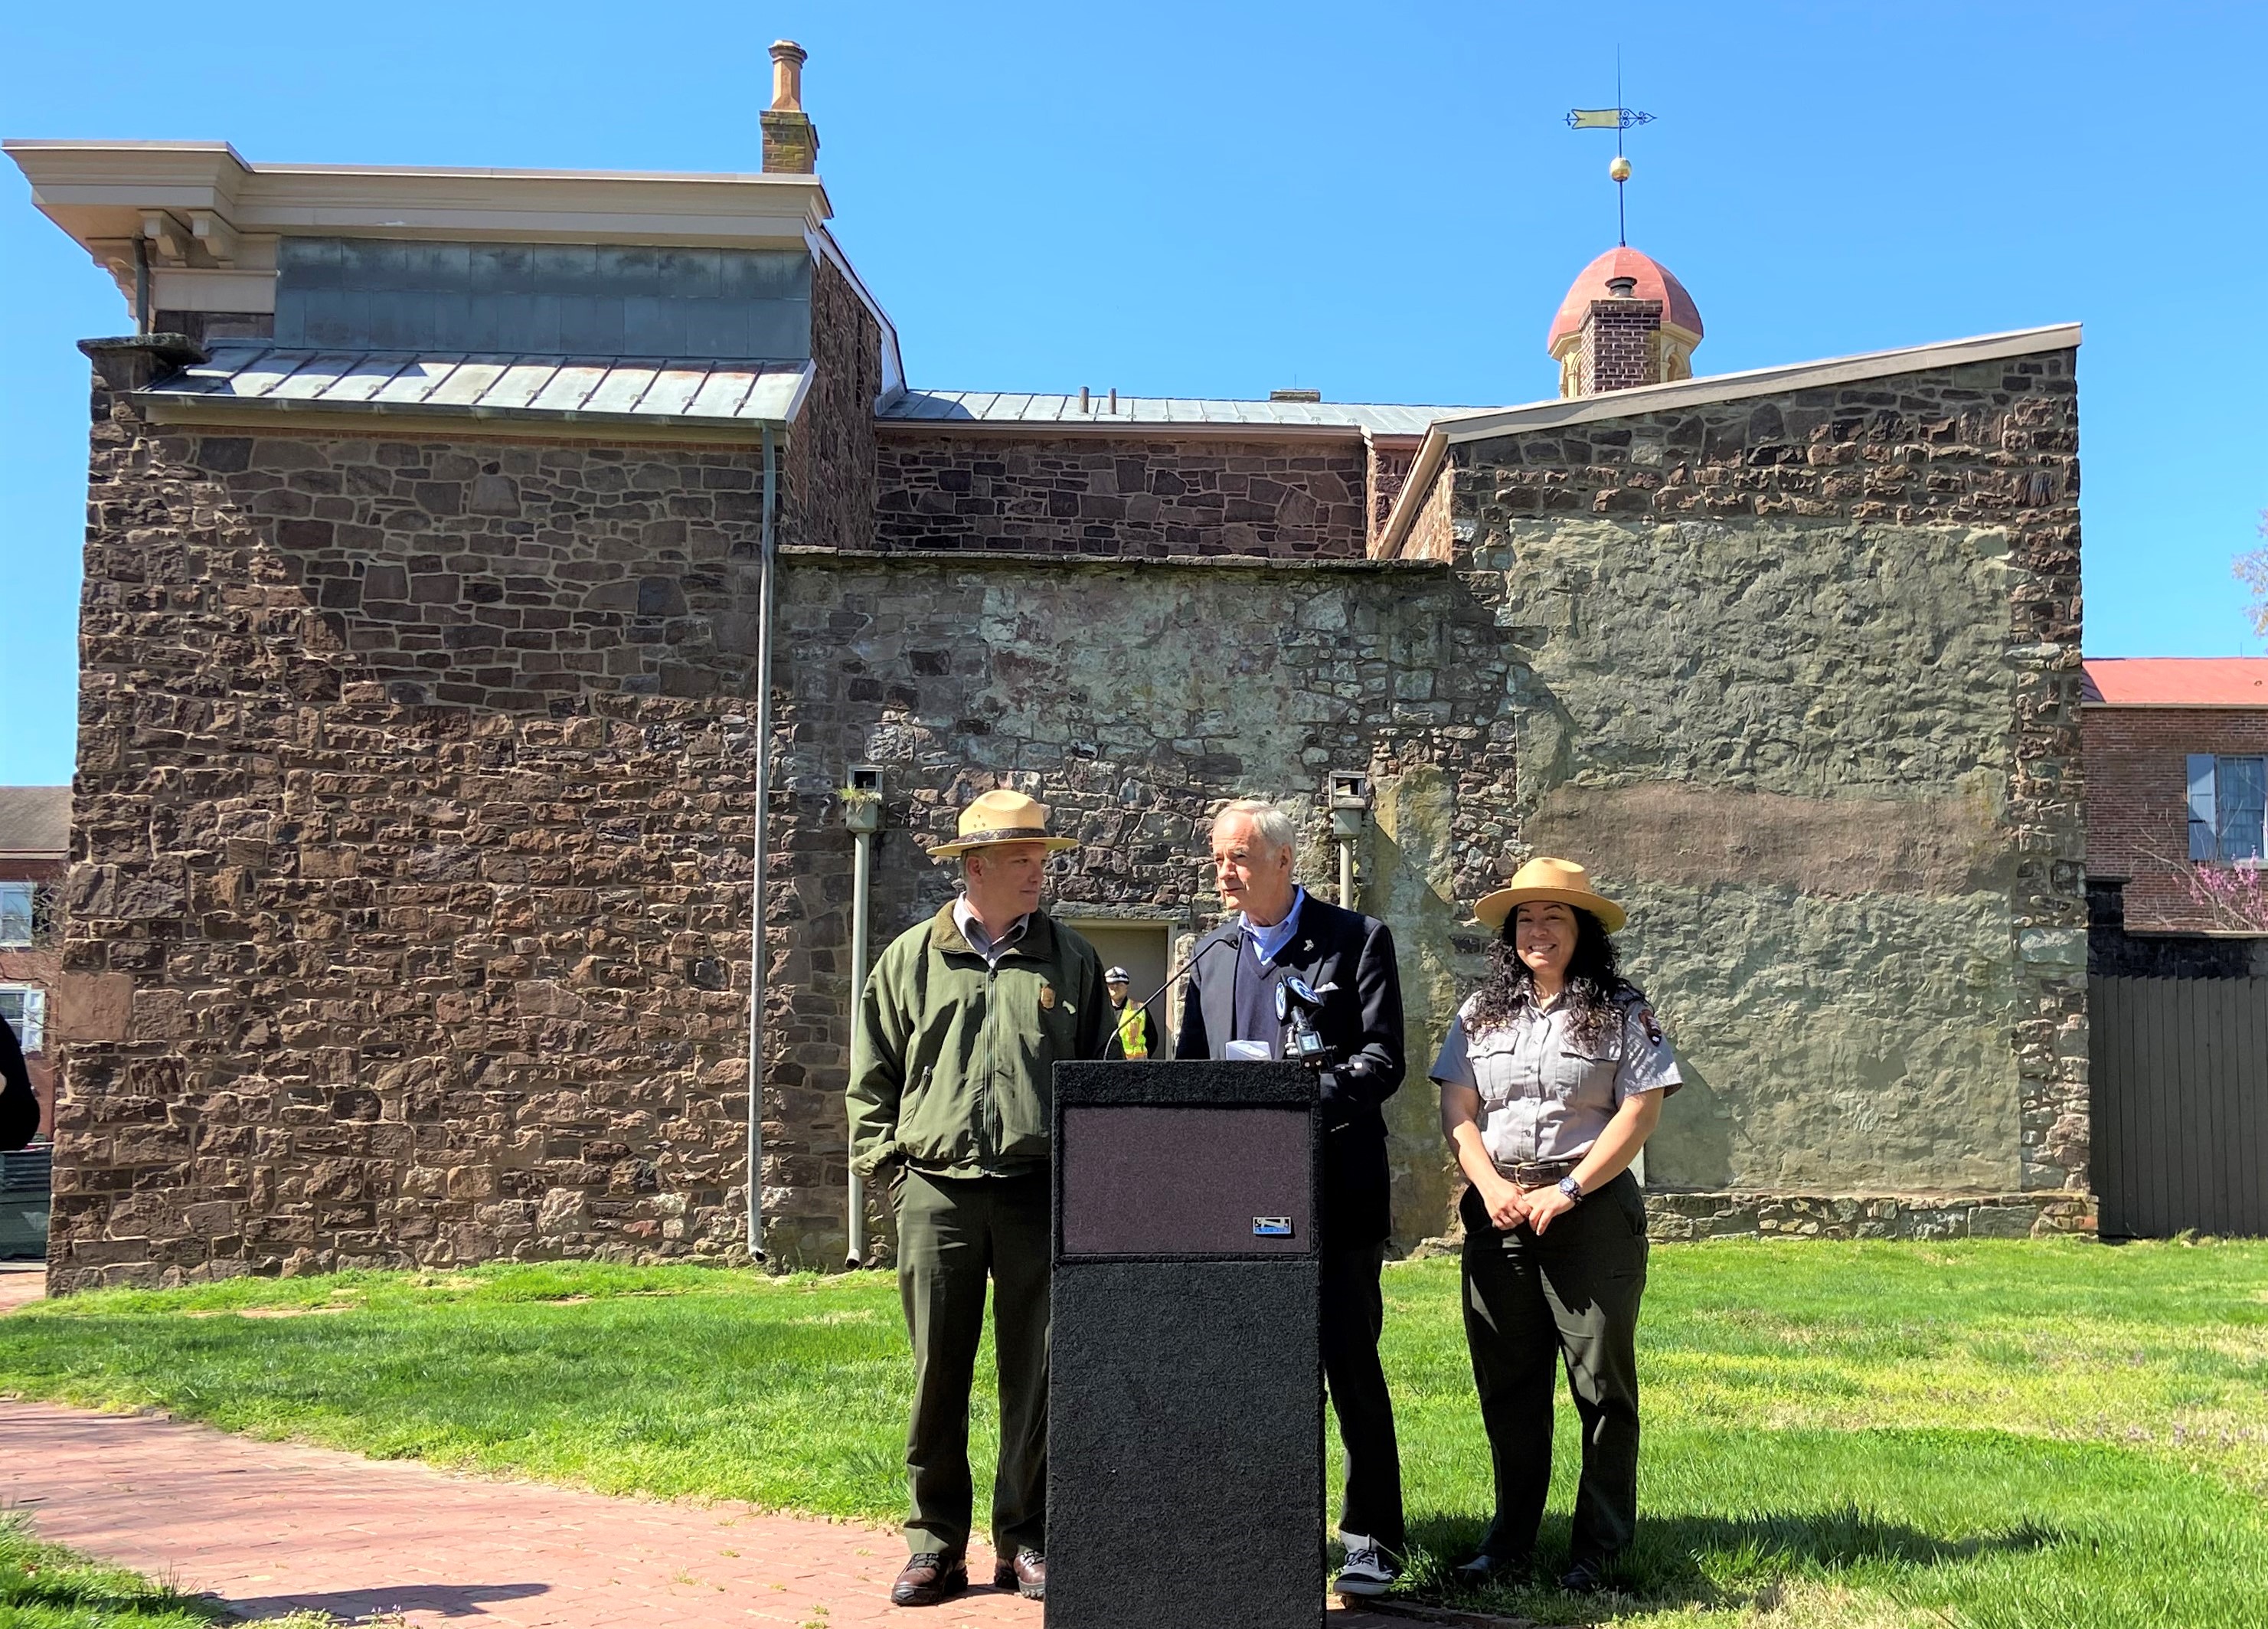 Two uniformed park rangers and another man stand behind a podium with a microphone.